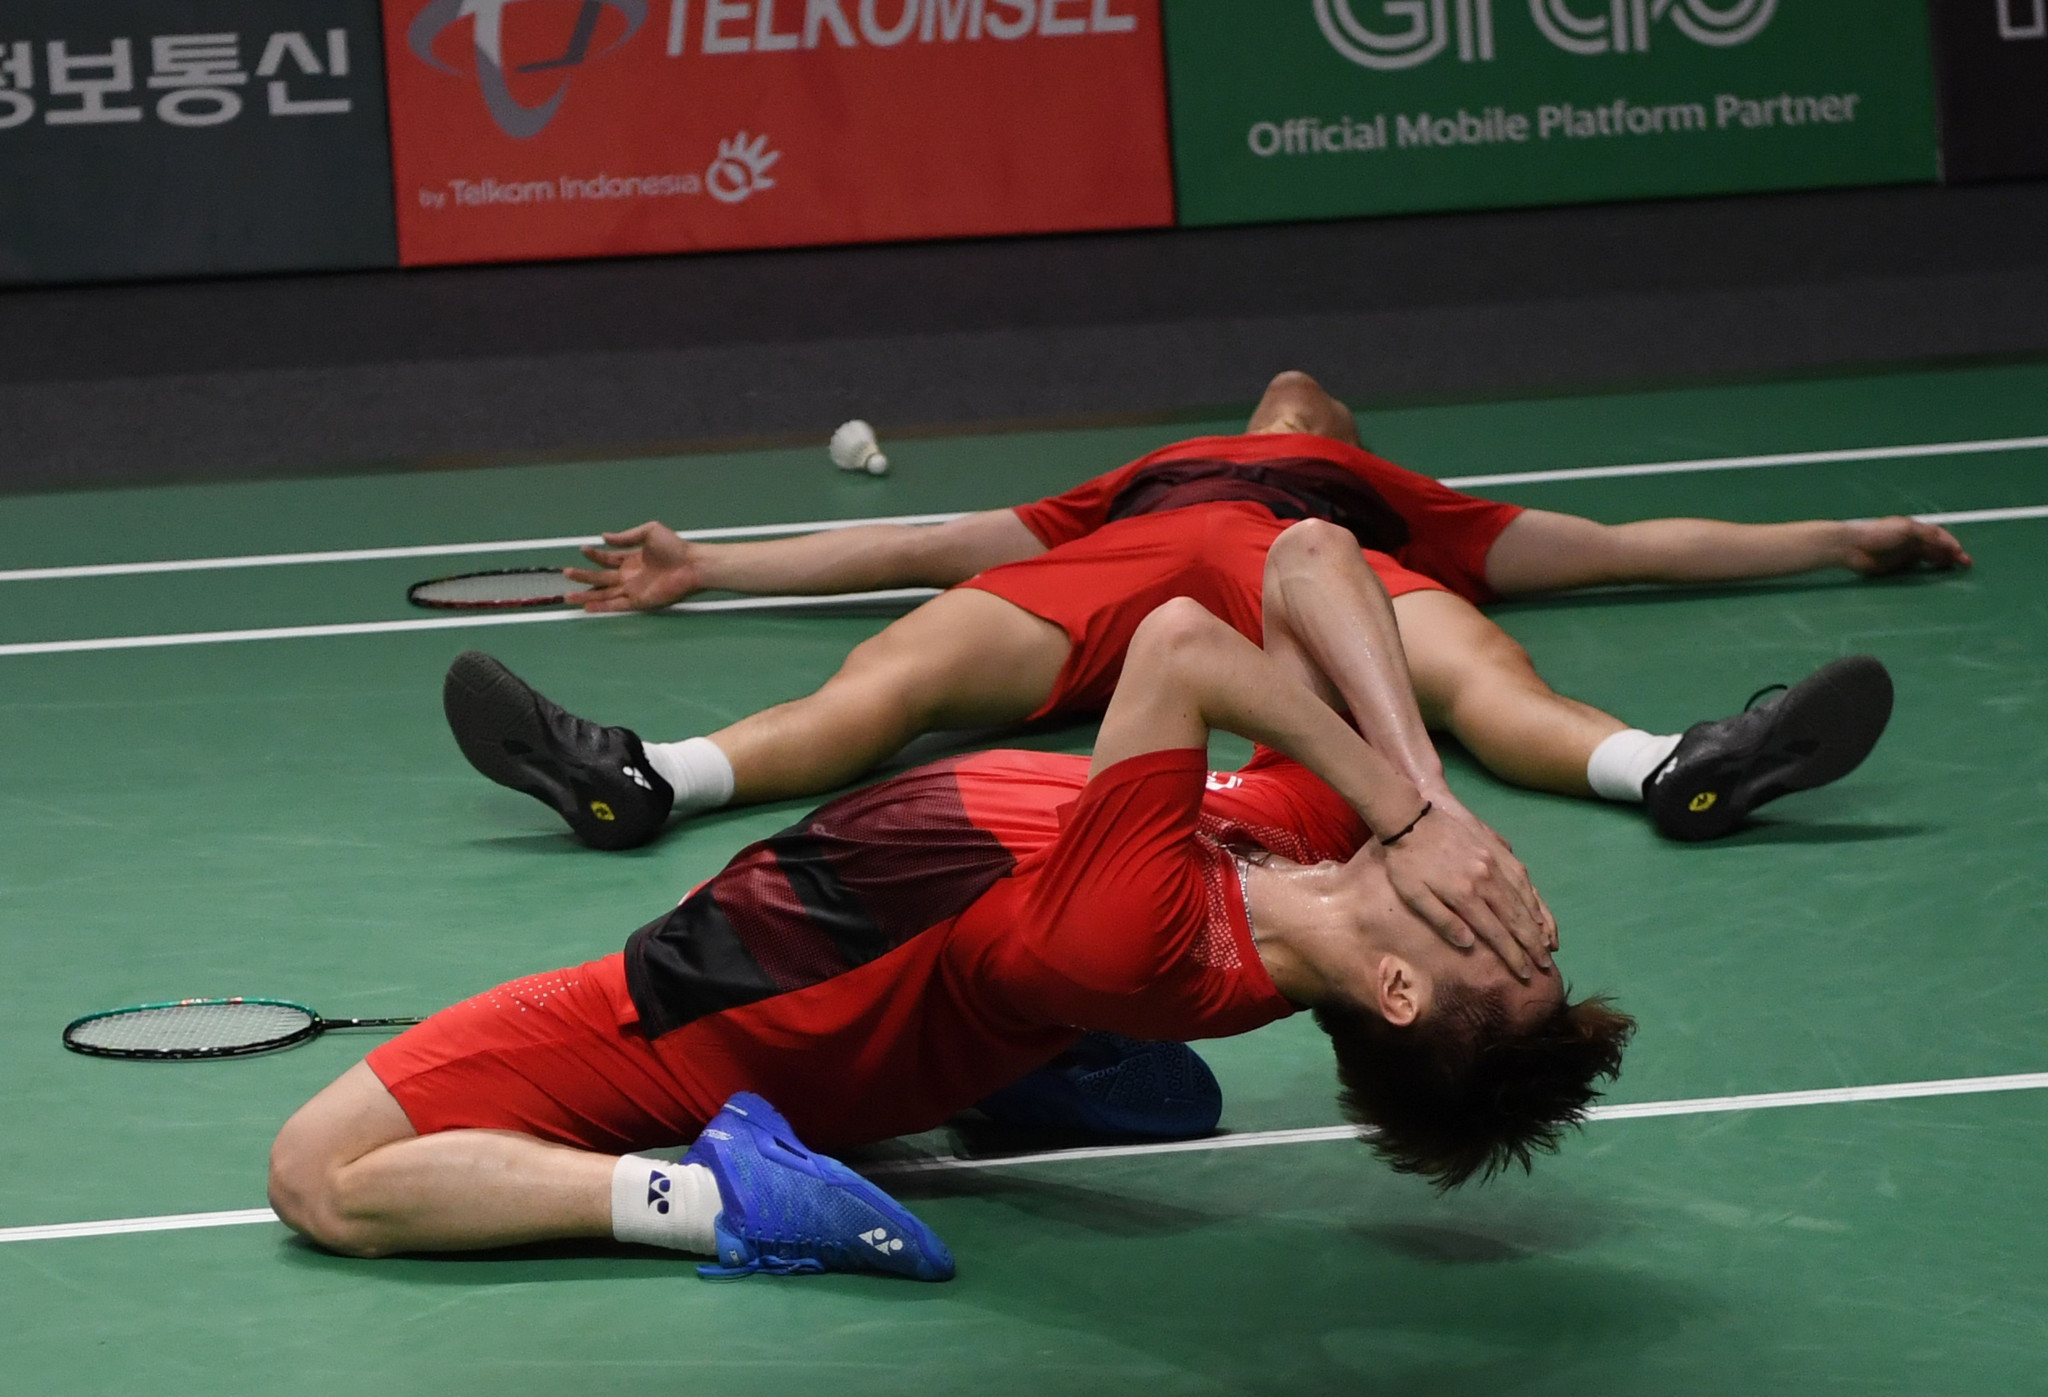 The host nation's one other gold medal today came courtesy of Kevin Sanjaya Sukamuljo and Marcus Fernaldi Gideon after they beat Muhammad Rian Ardianto and Fajar Alfian in an all-Indonesian men's doubles badminton final ©Getty Images